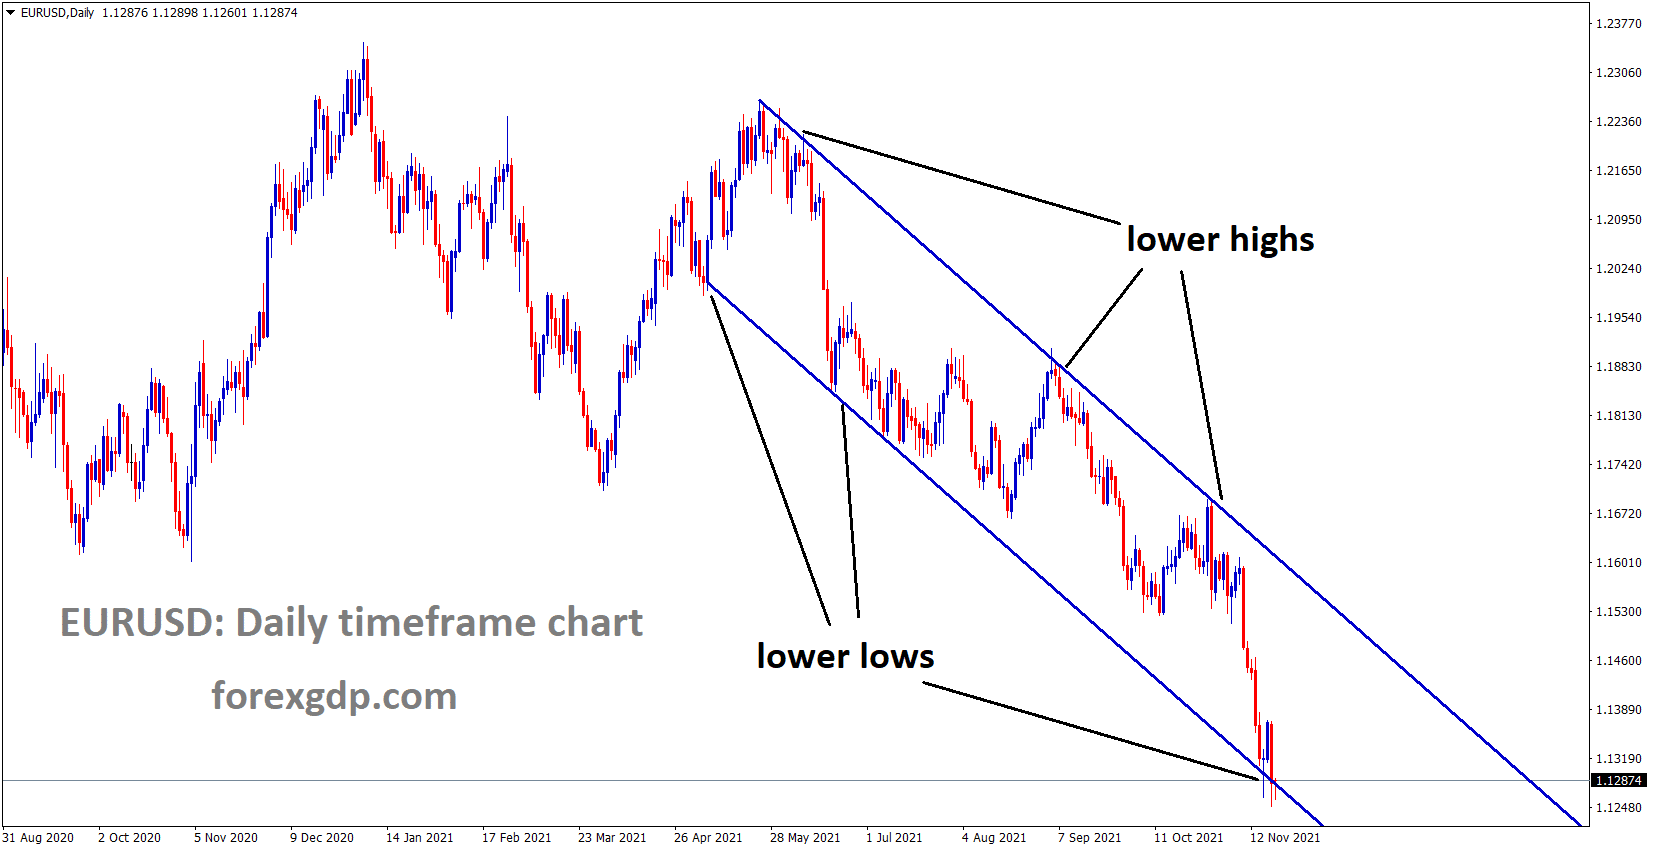 EURUSD is moving in the Descending channel and the market reached the lower low area of the channel